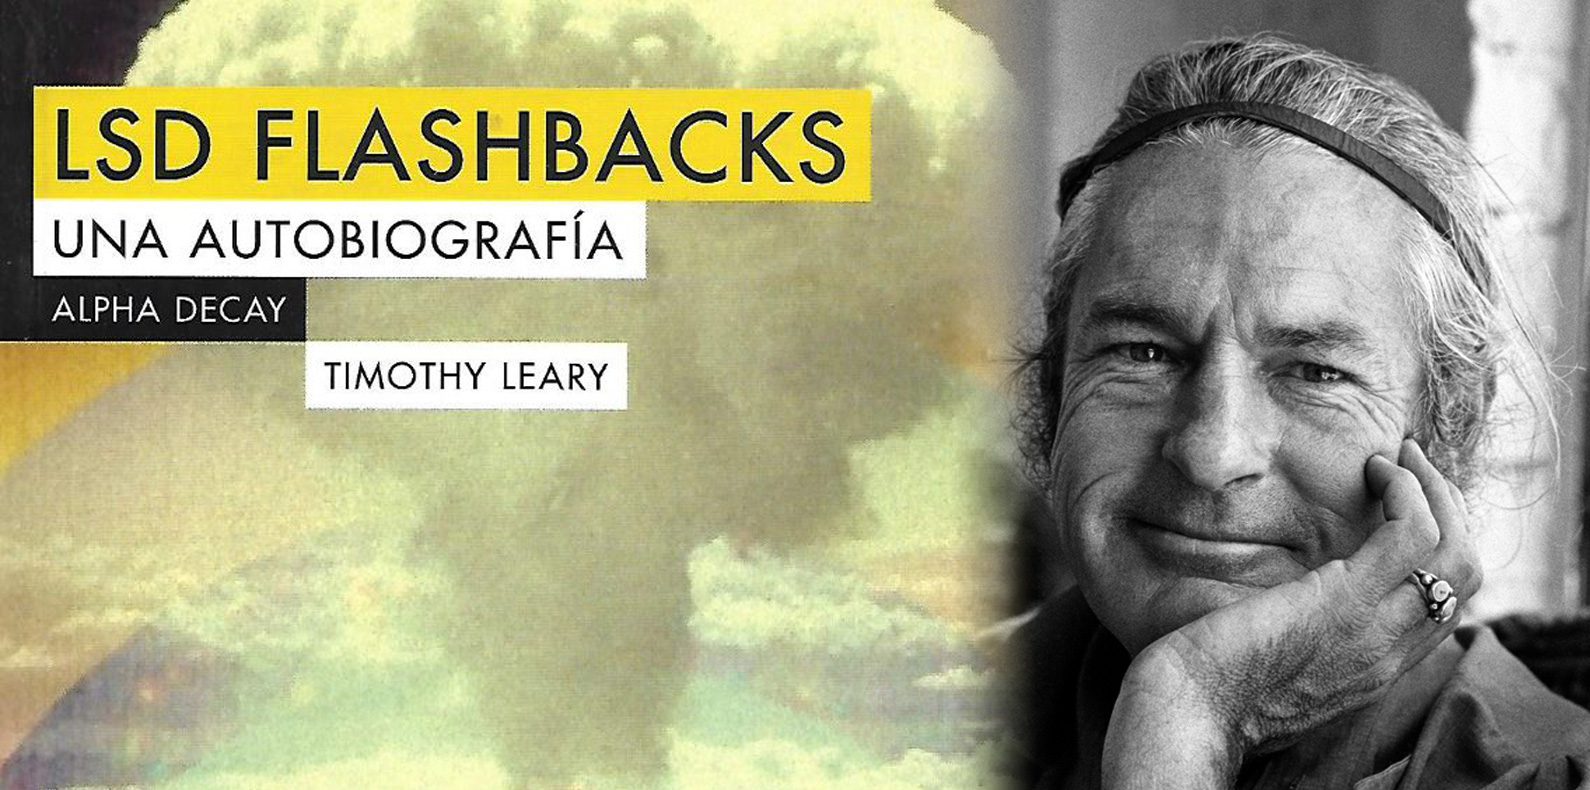 LSD Flashbacks. the autobiography of the LSD apostle, Timothy Leary